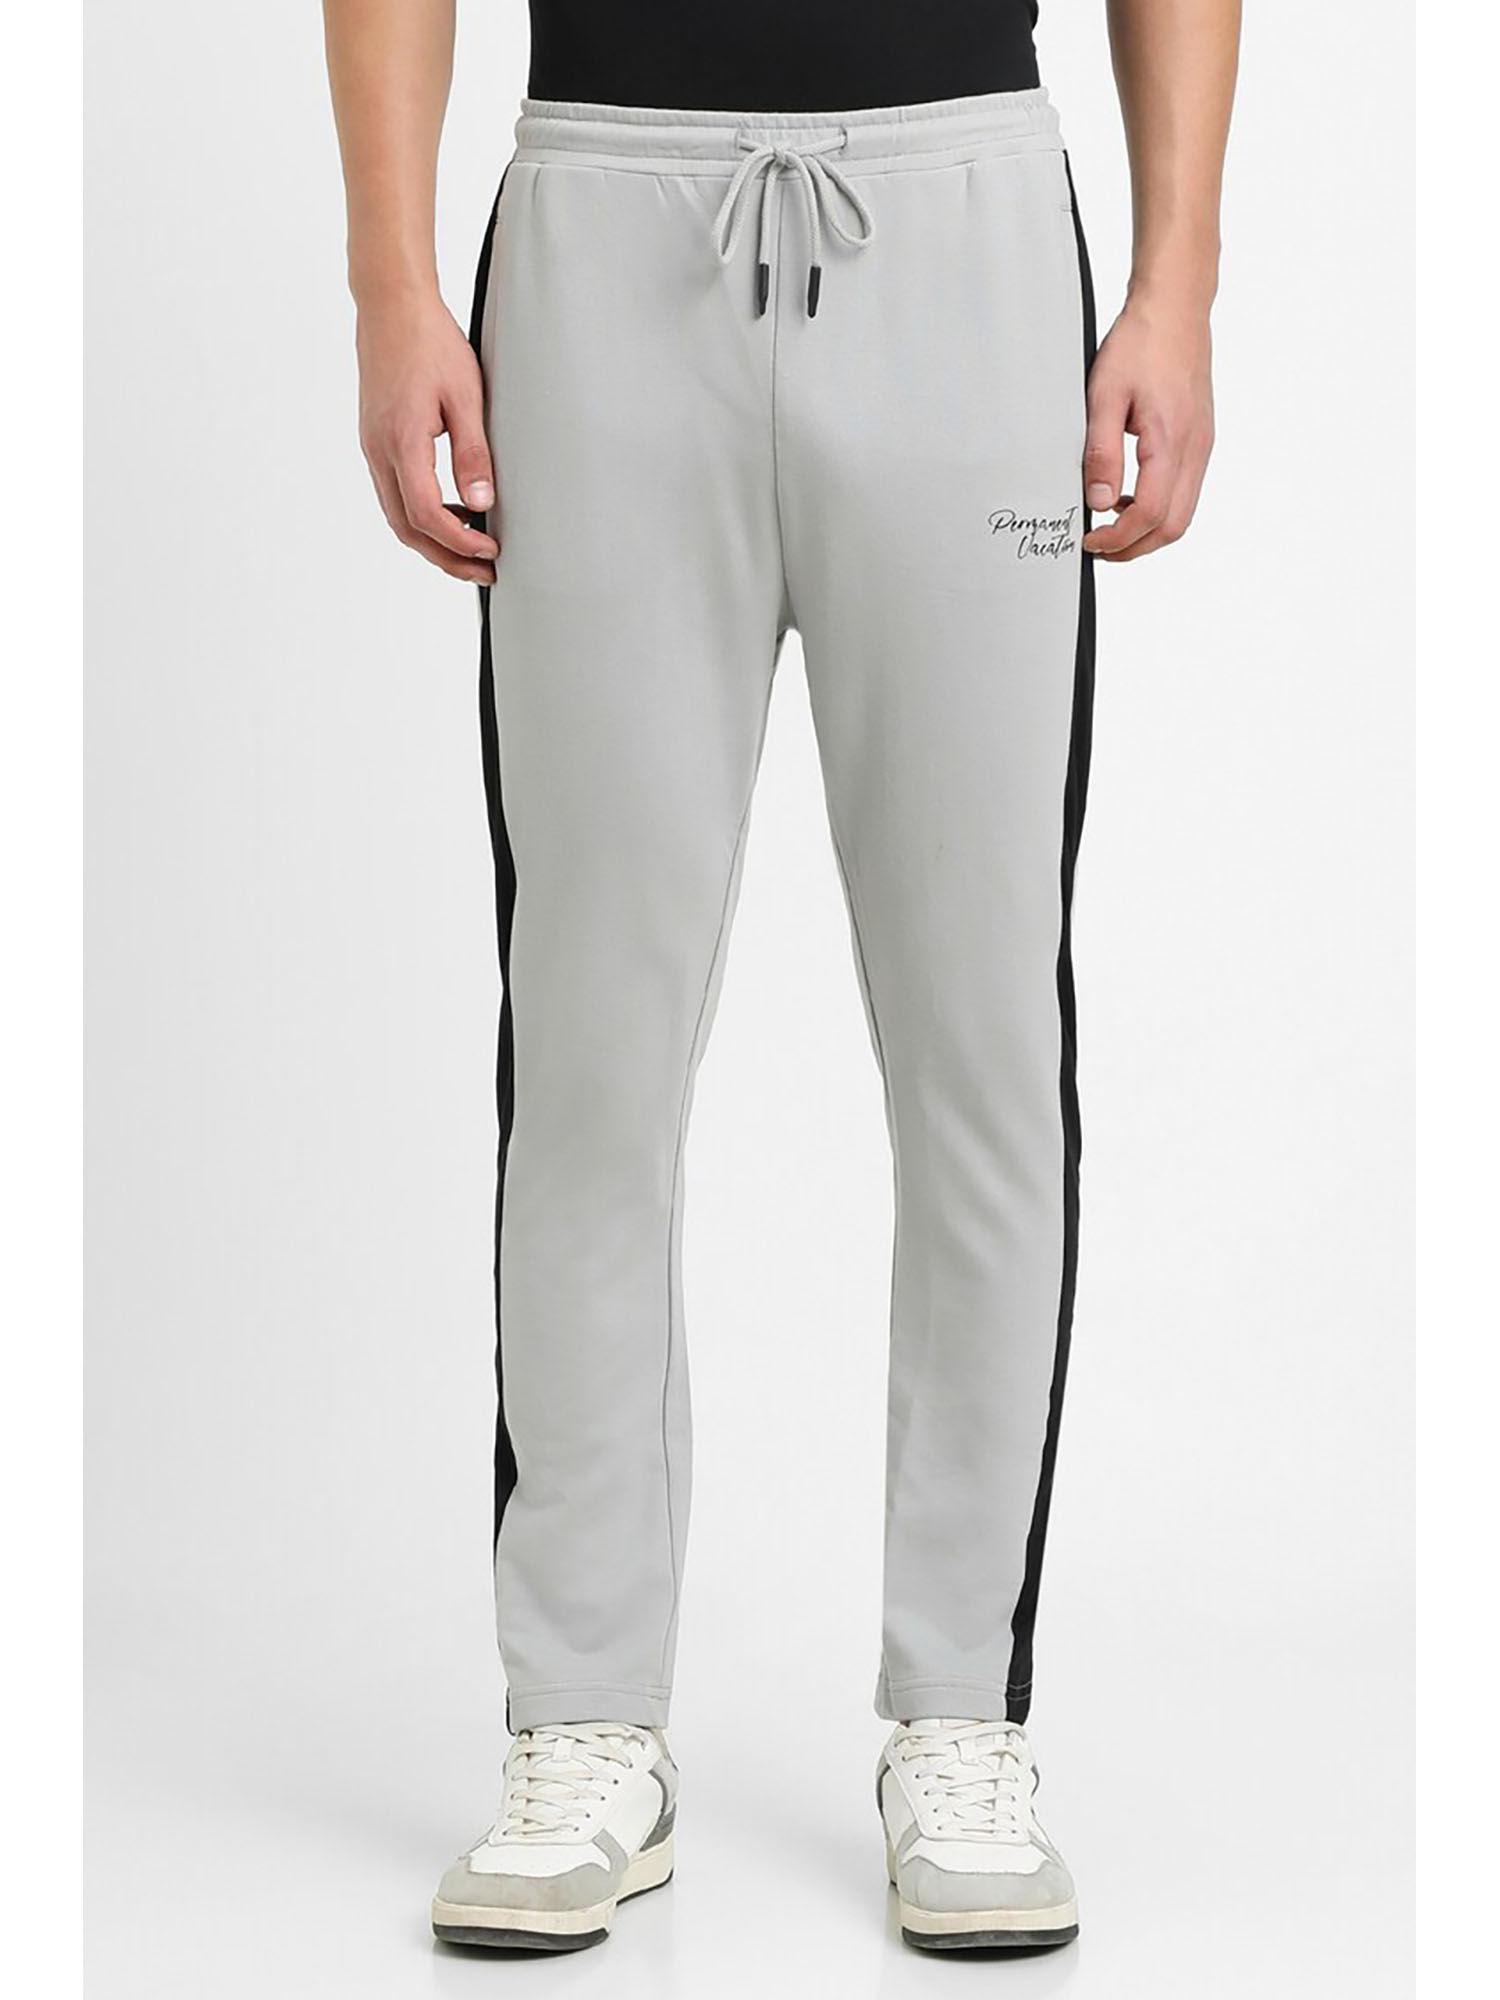 grey-solid-track-pant